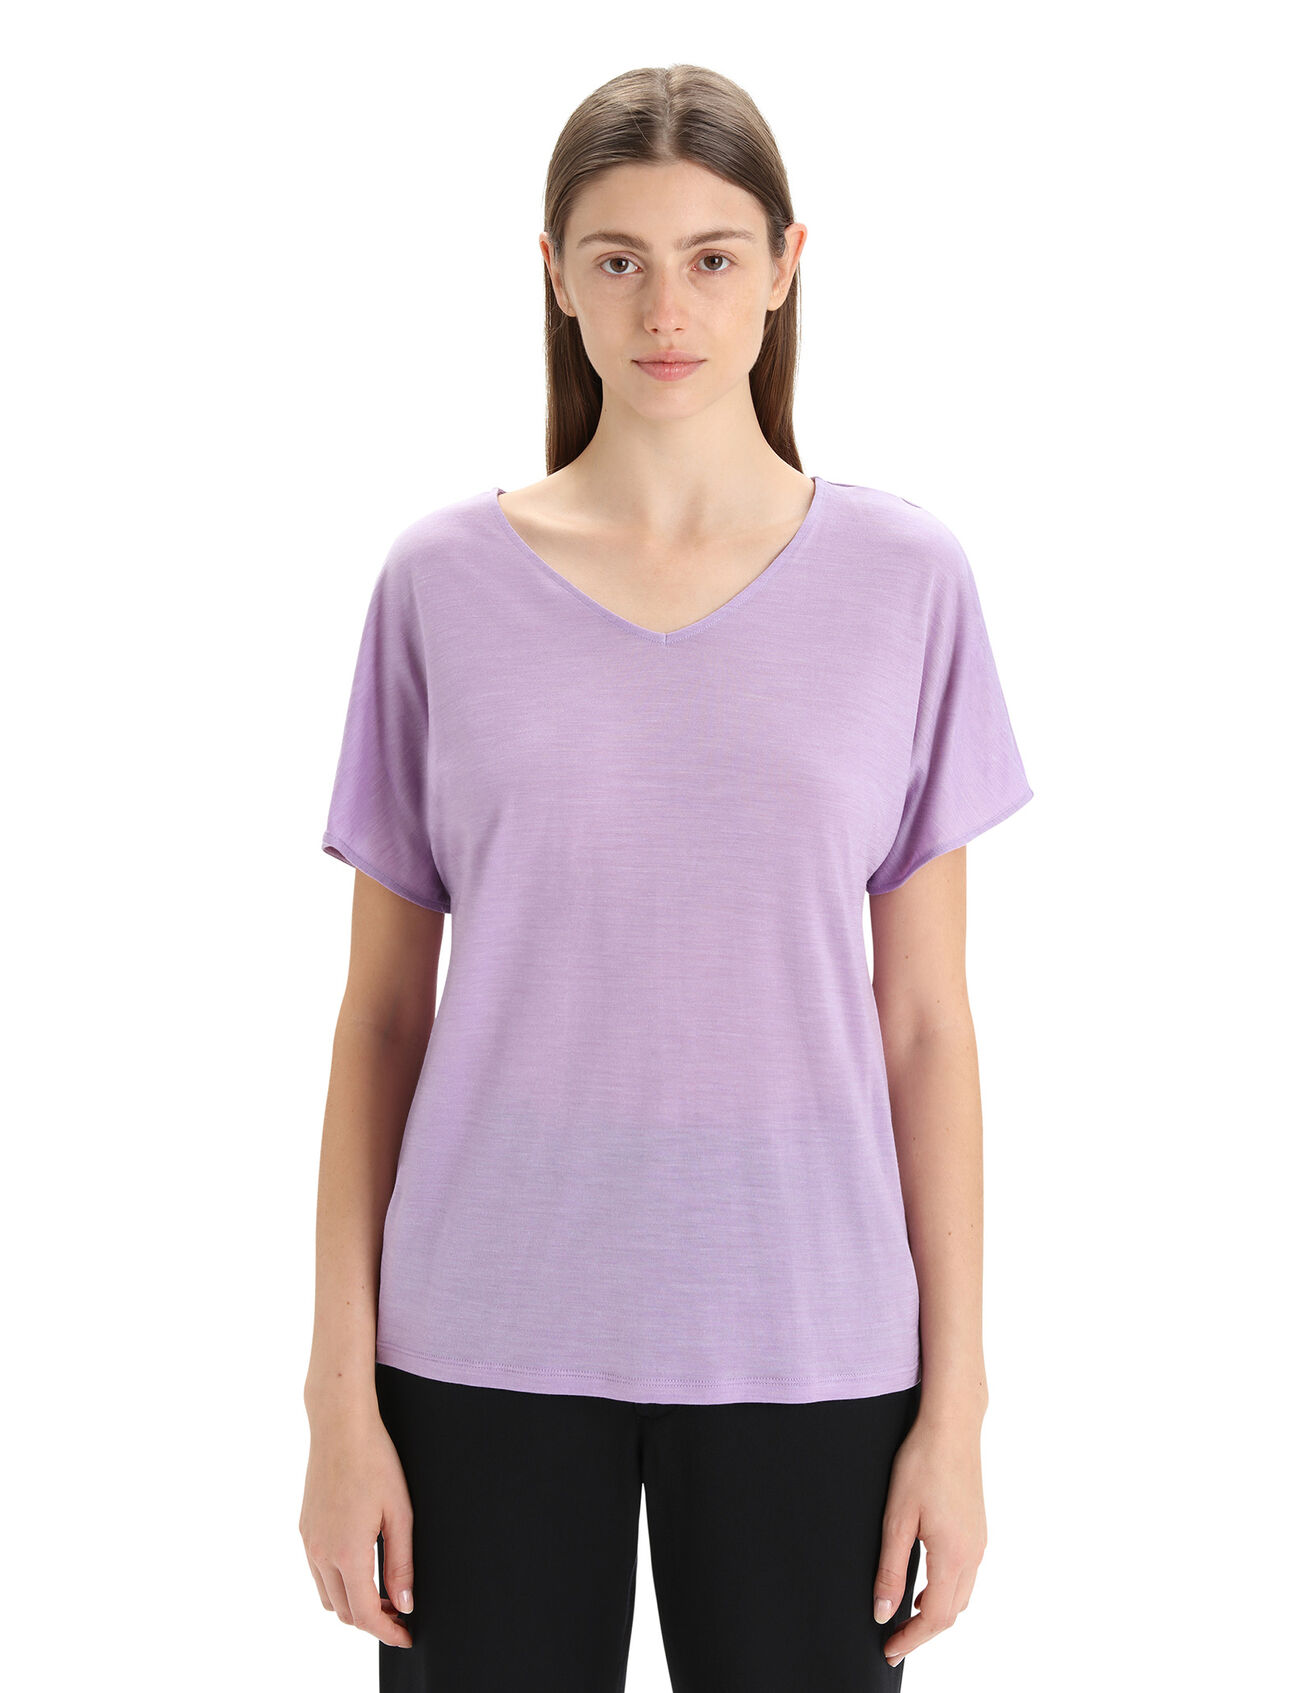 dla kobiet Merino Drayden Reversible Short Sleeve Top A versatile everyday shirt featuring our Cool-Lite™ jersey fabric, the Drayden Reversible Short Sleeve Top can be worn frontwards for a soft V neck, or backwards for a high crew neck.